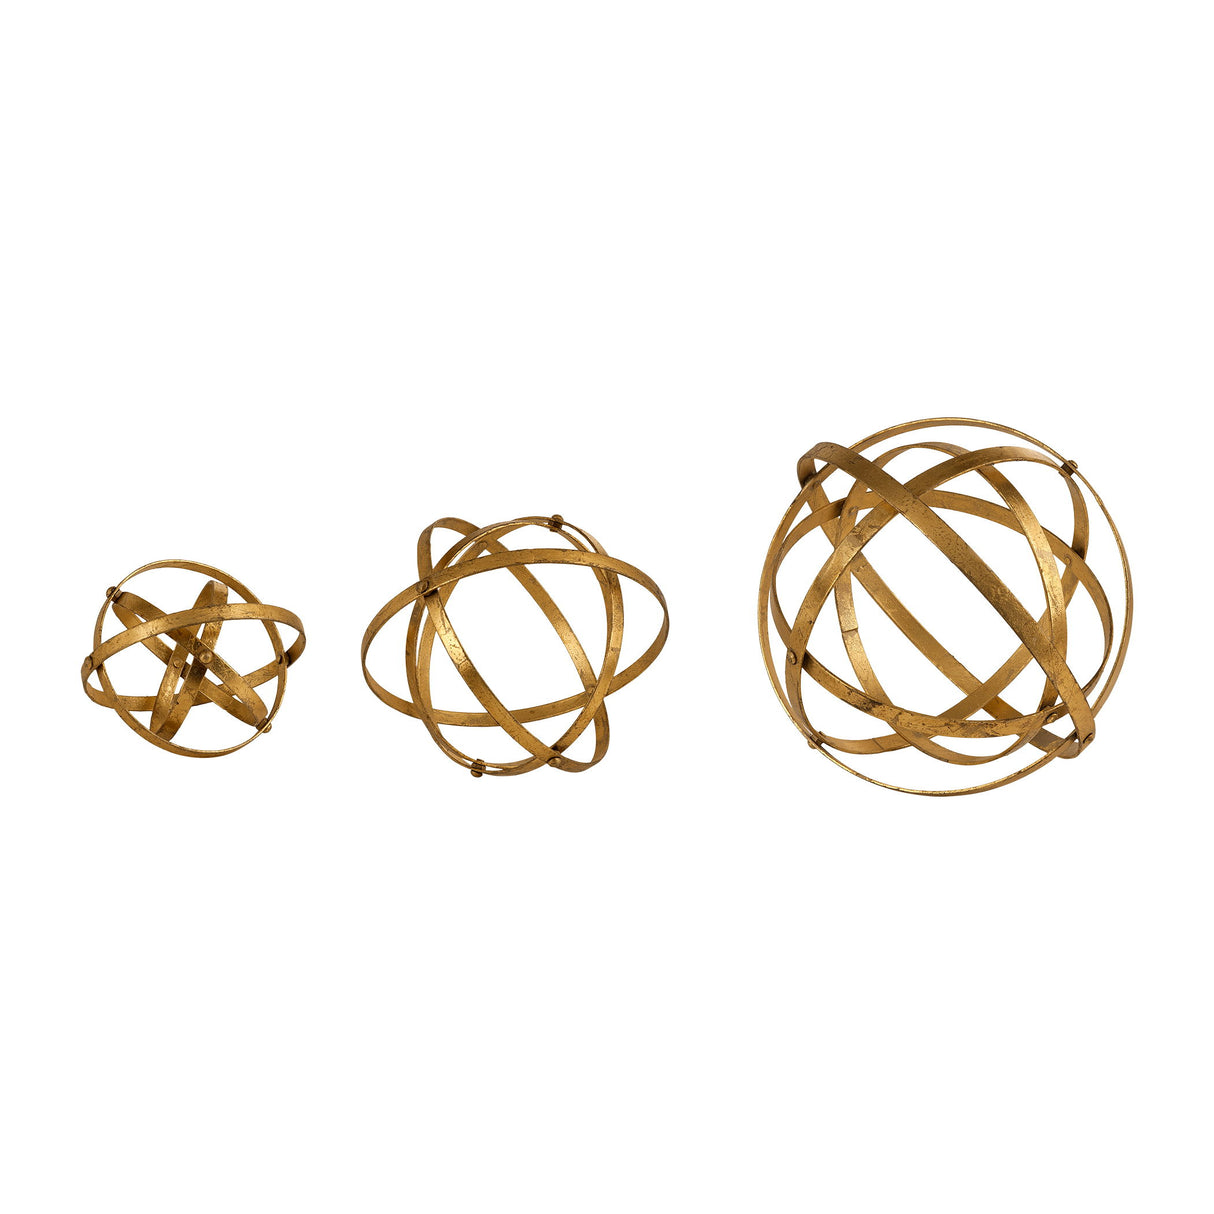 Stetson - Spheres, Set Of 3 - Gold